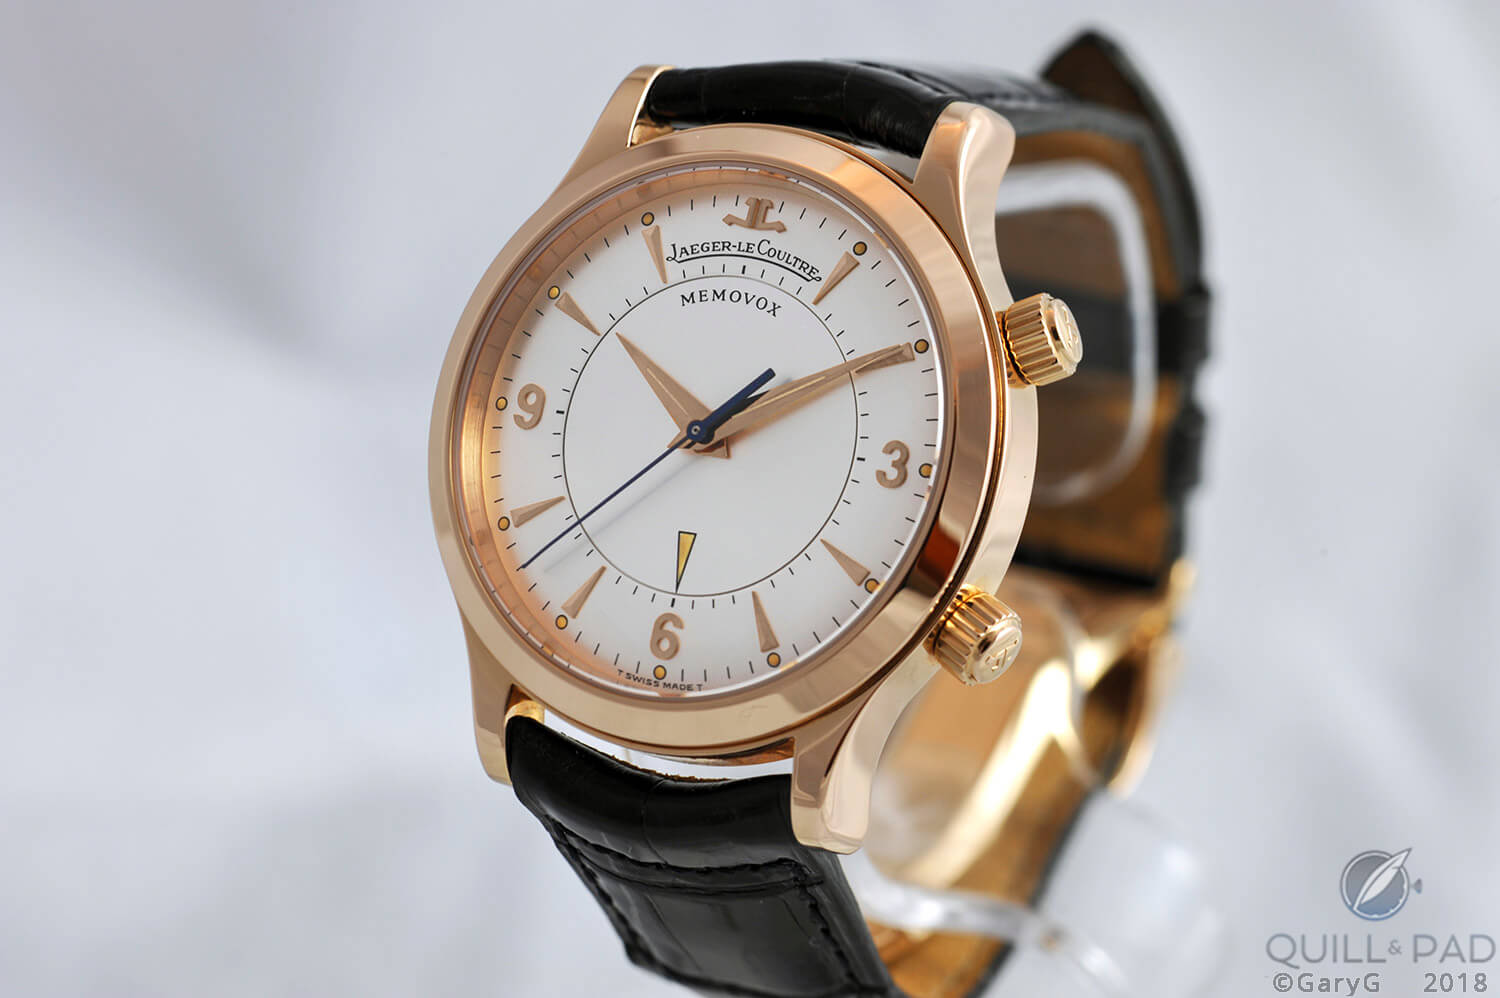 Jaeger-LeCoultre Memovox in pink gold